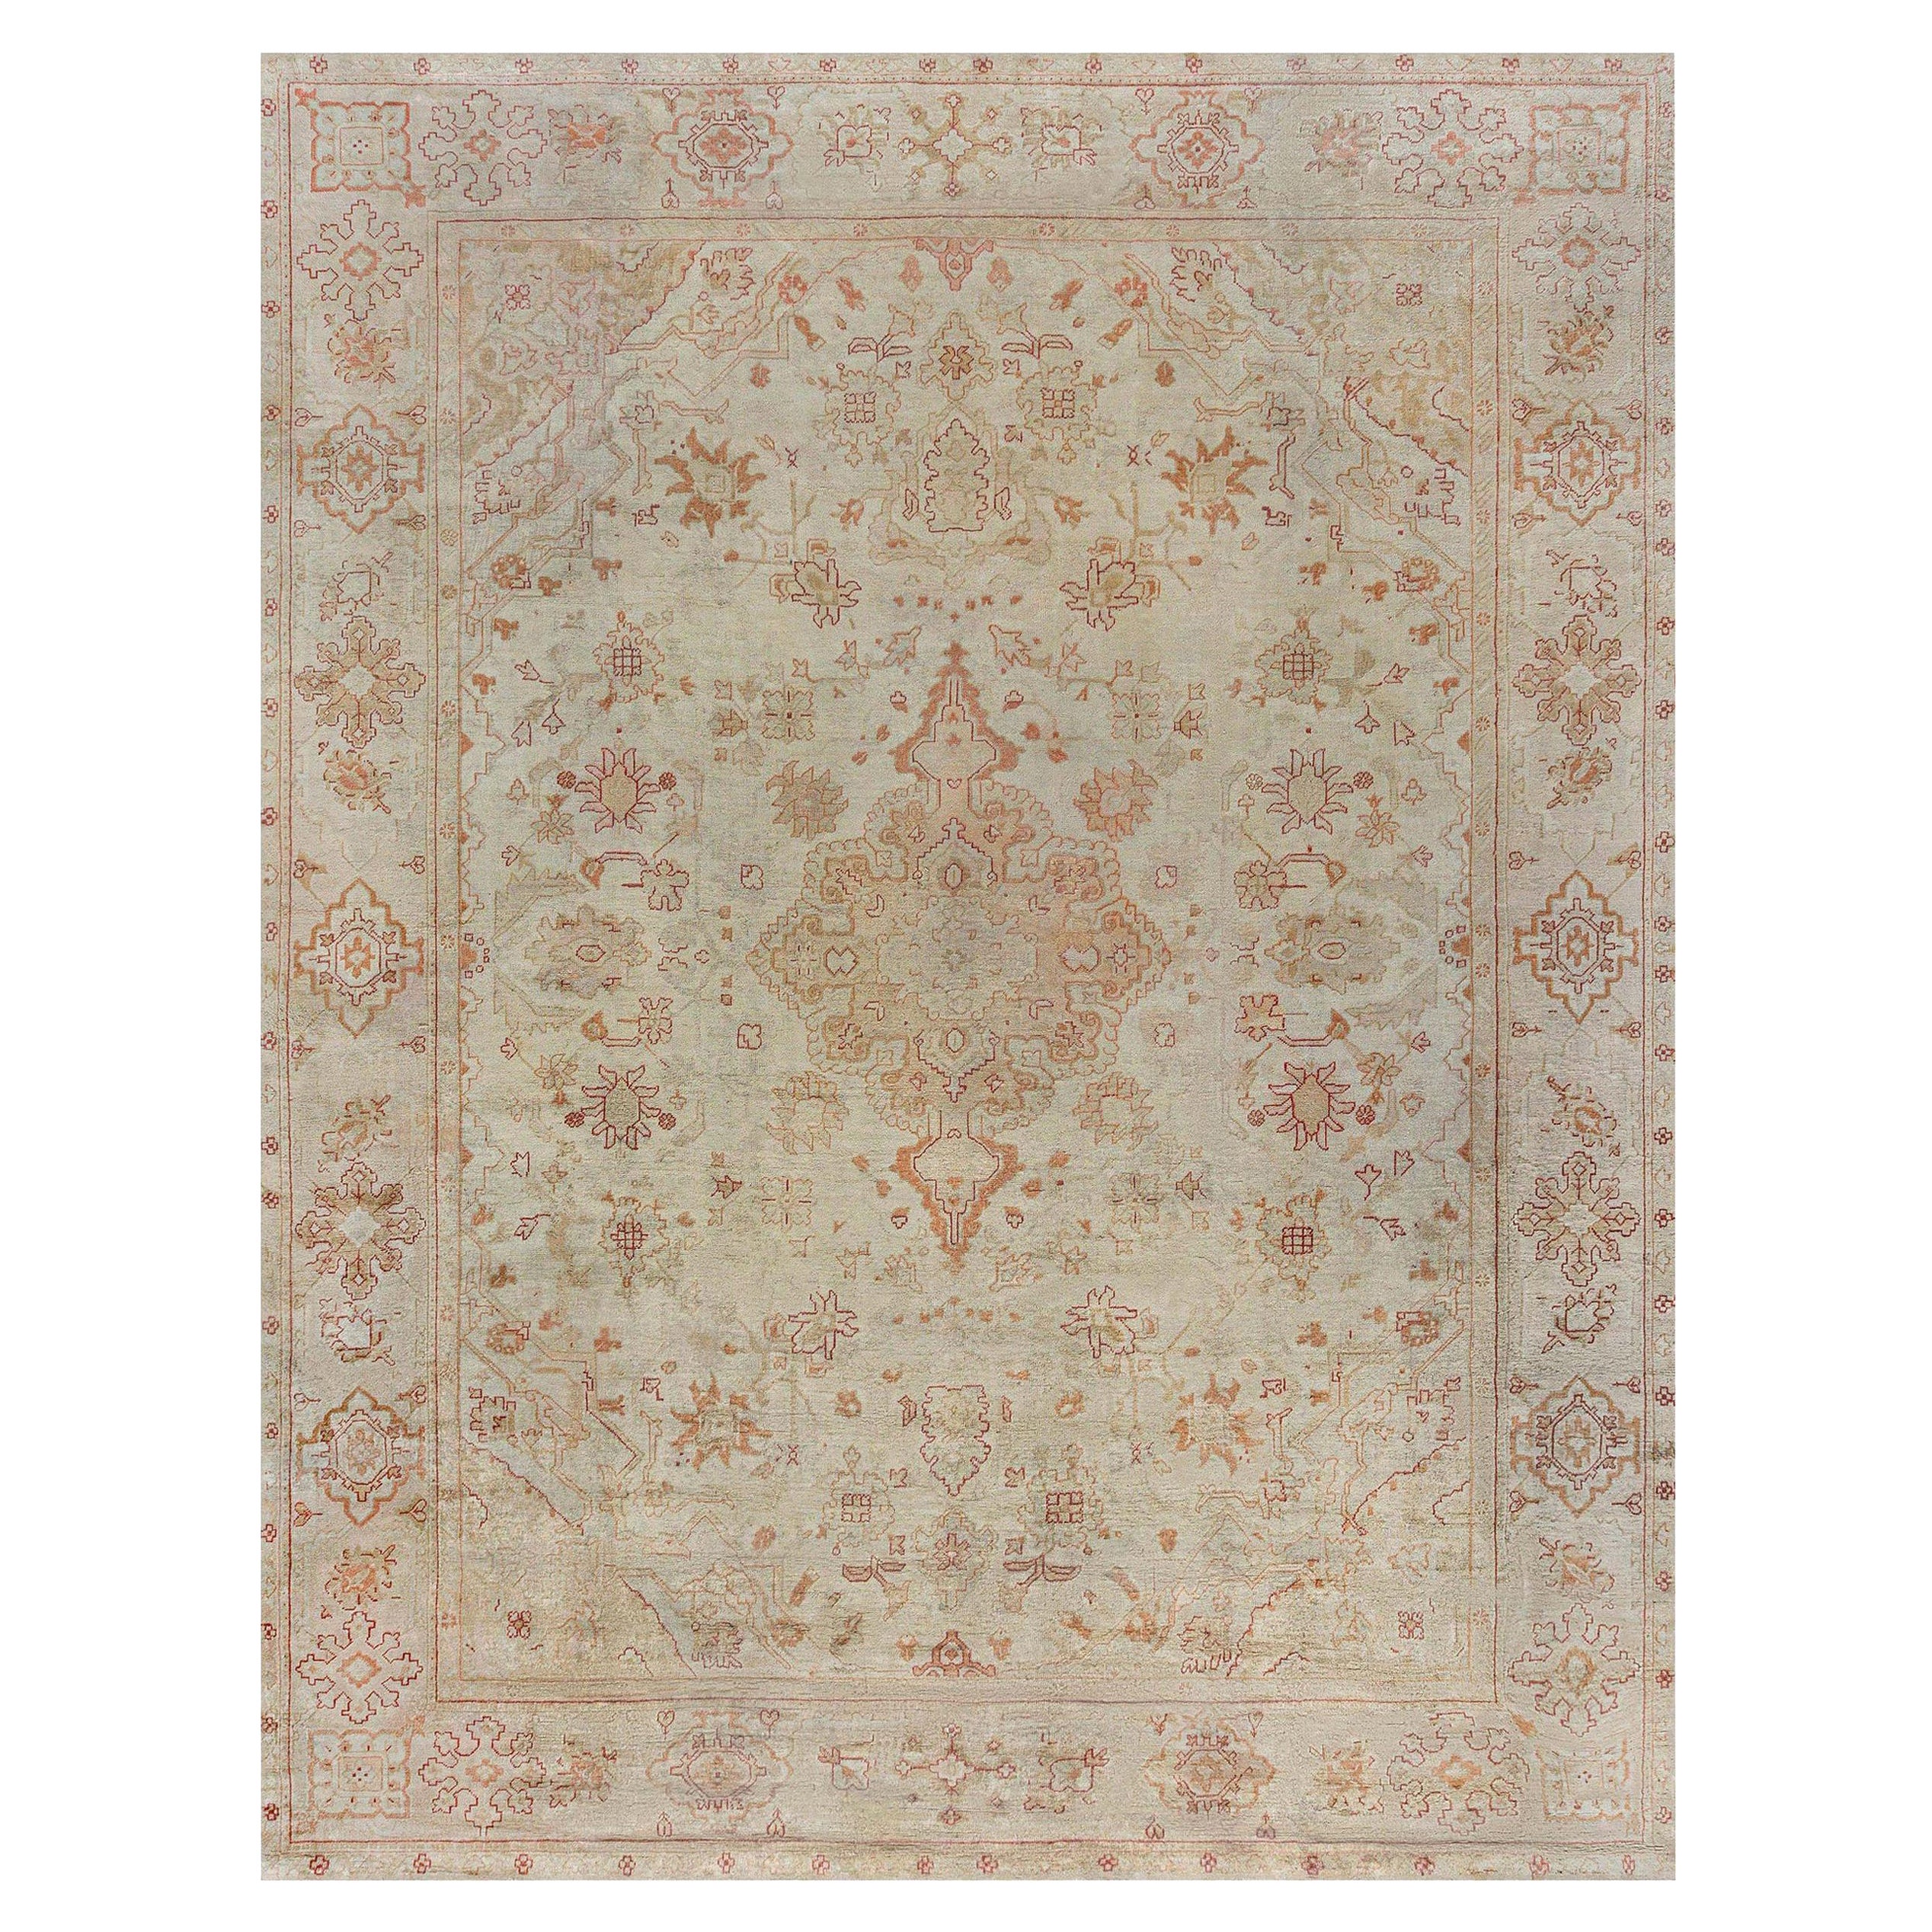 Early 20th Century Turkish Oushak Hand Knotted Rug